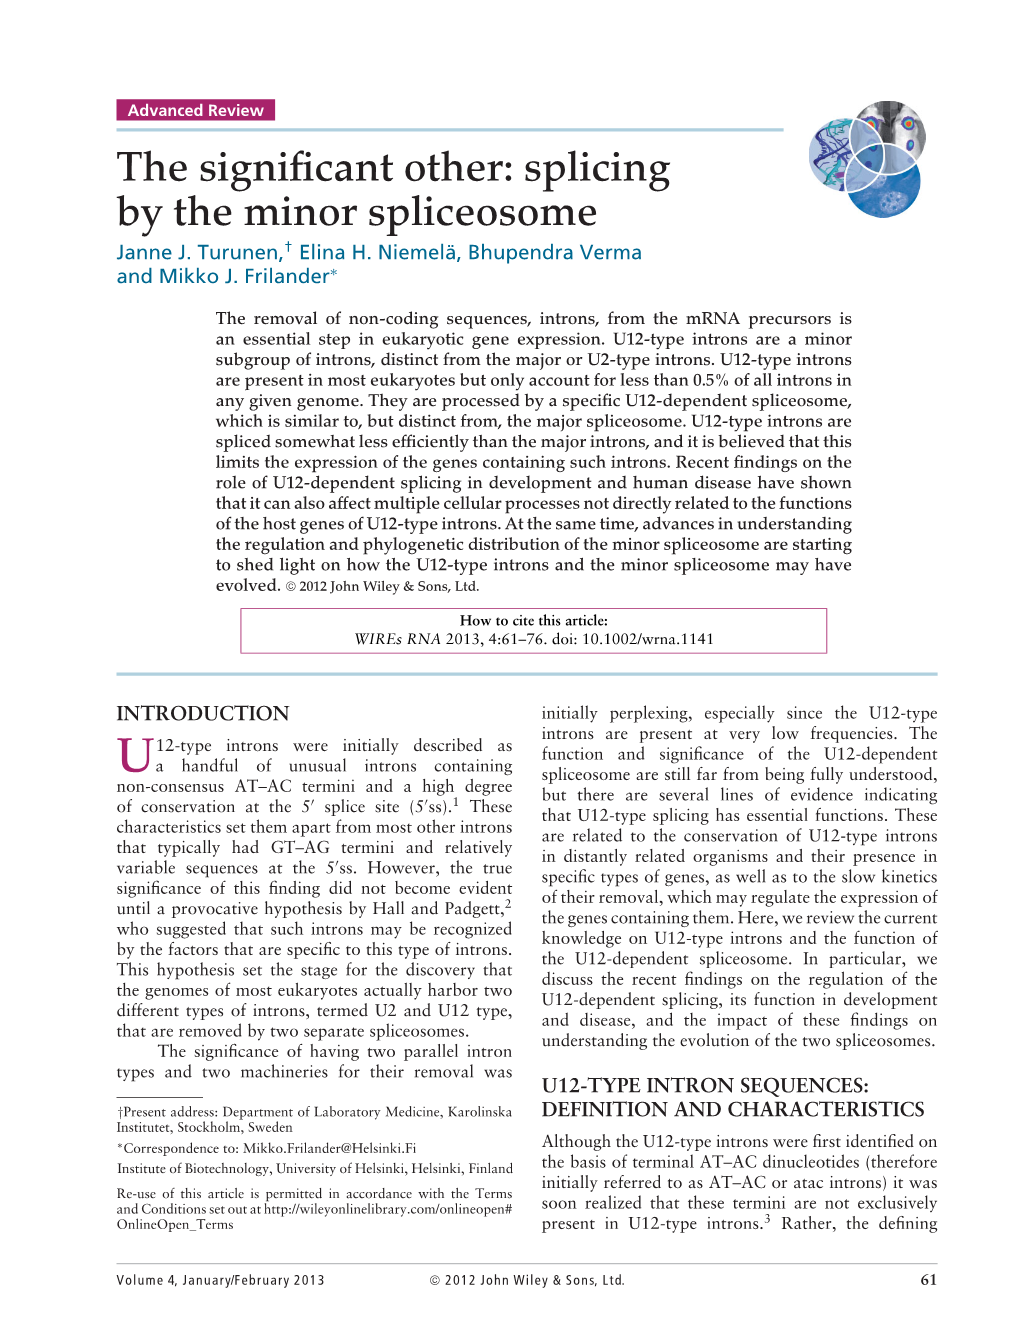 The Significant Other: Splicing by the Minor Spliceosome